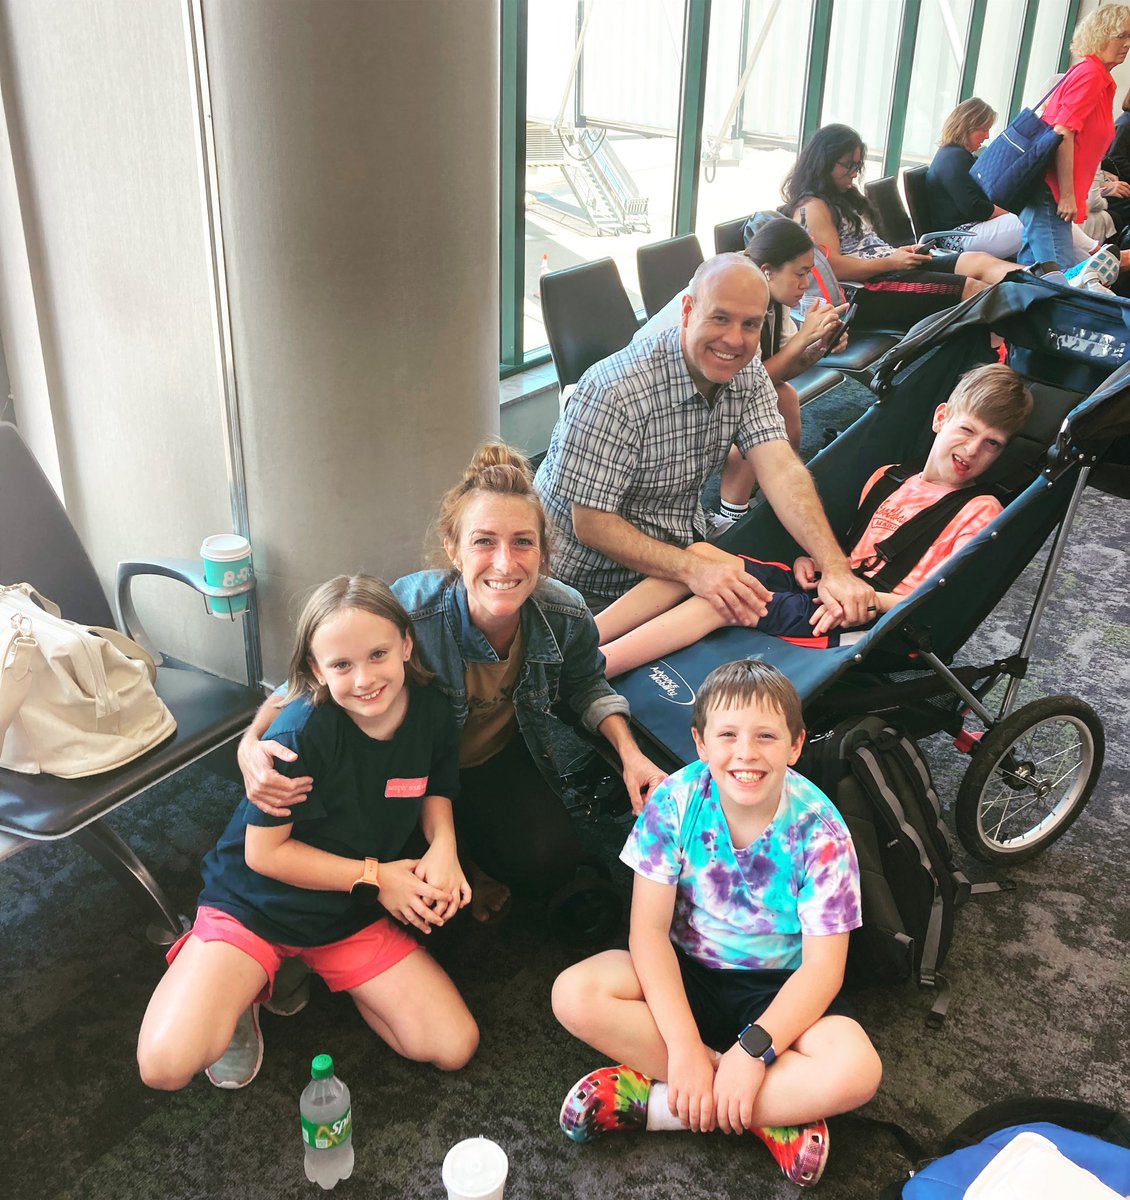 Finally on our #familyvacation! Colorado here we come. (Please, Southwest don’t lose our adaptive stroller.)